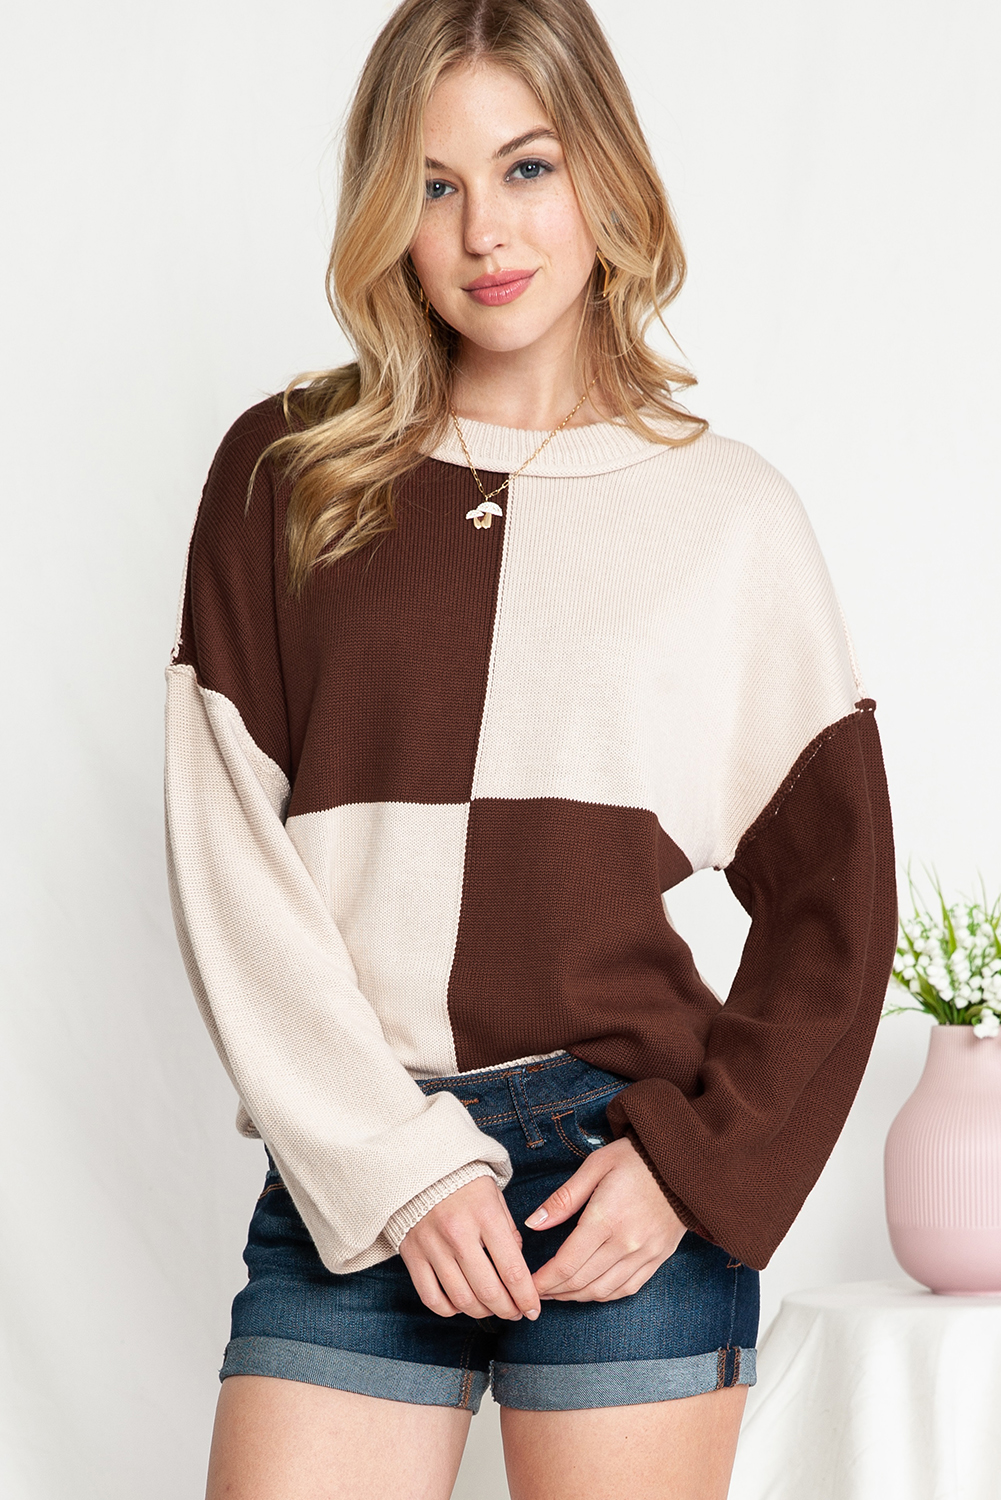 Shewin Wholesale Clothes Stores COFFEE Contrast Color Exposed Seam Lantern Sleeve Sweater